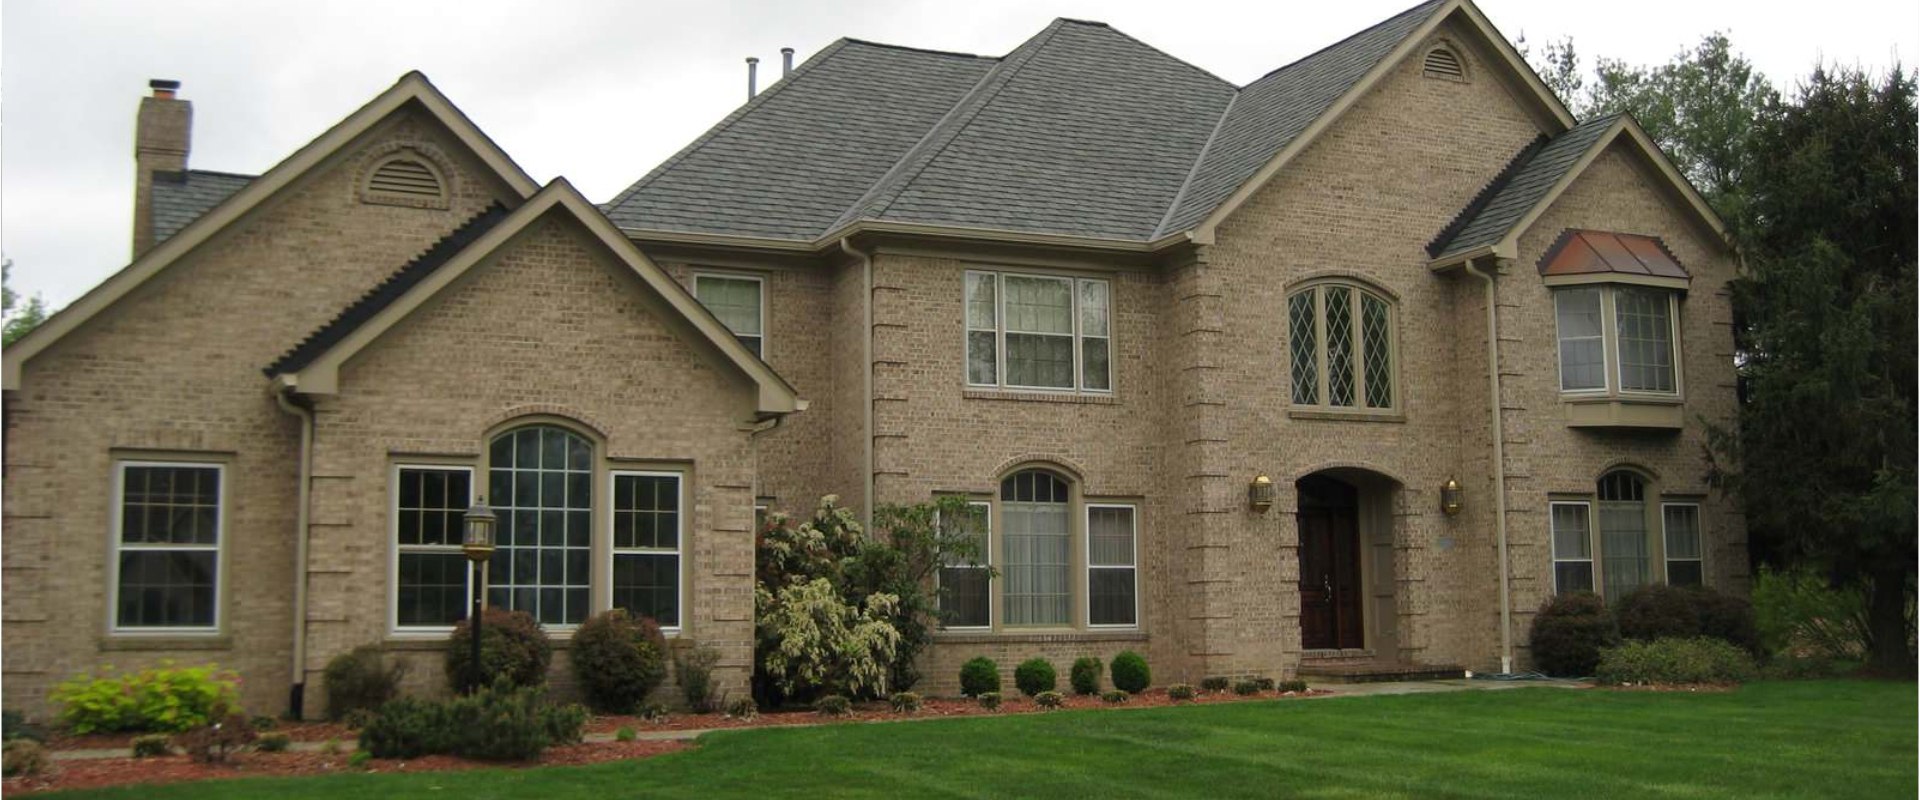 Finding the Best Roofers and Siding Contractors in Baltimore, MD